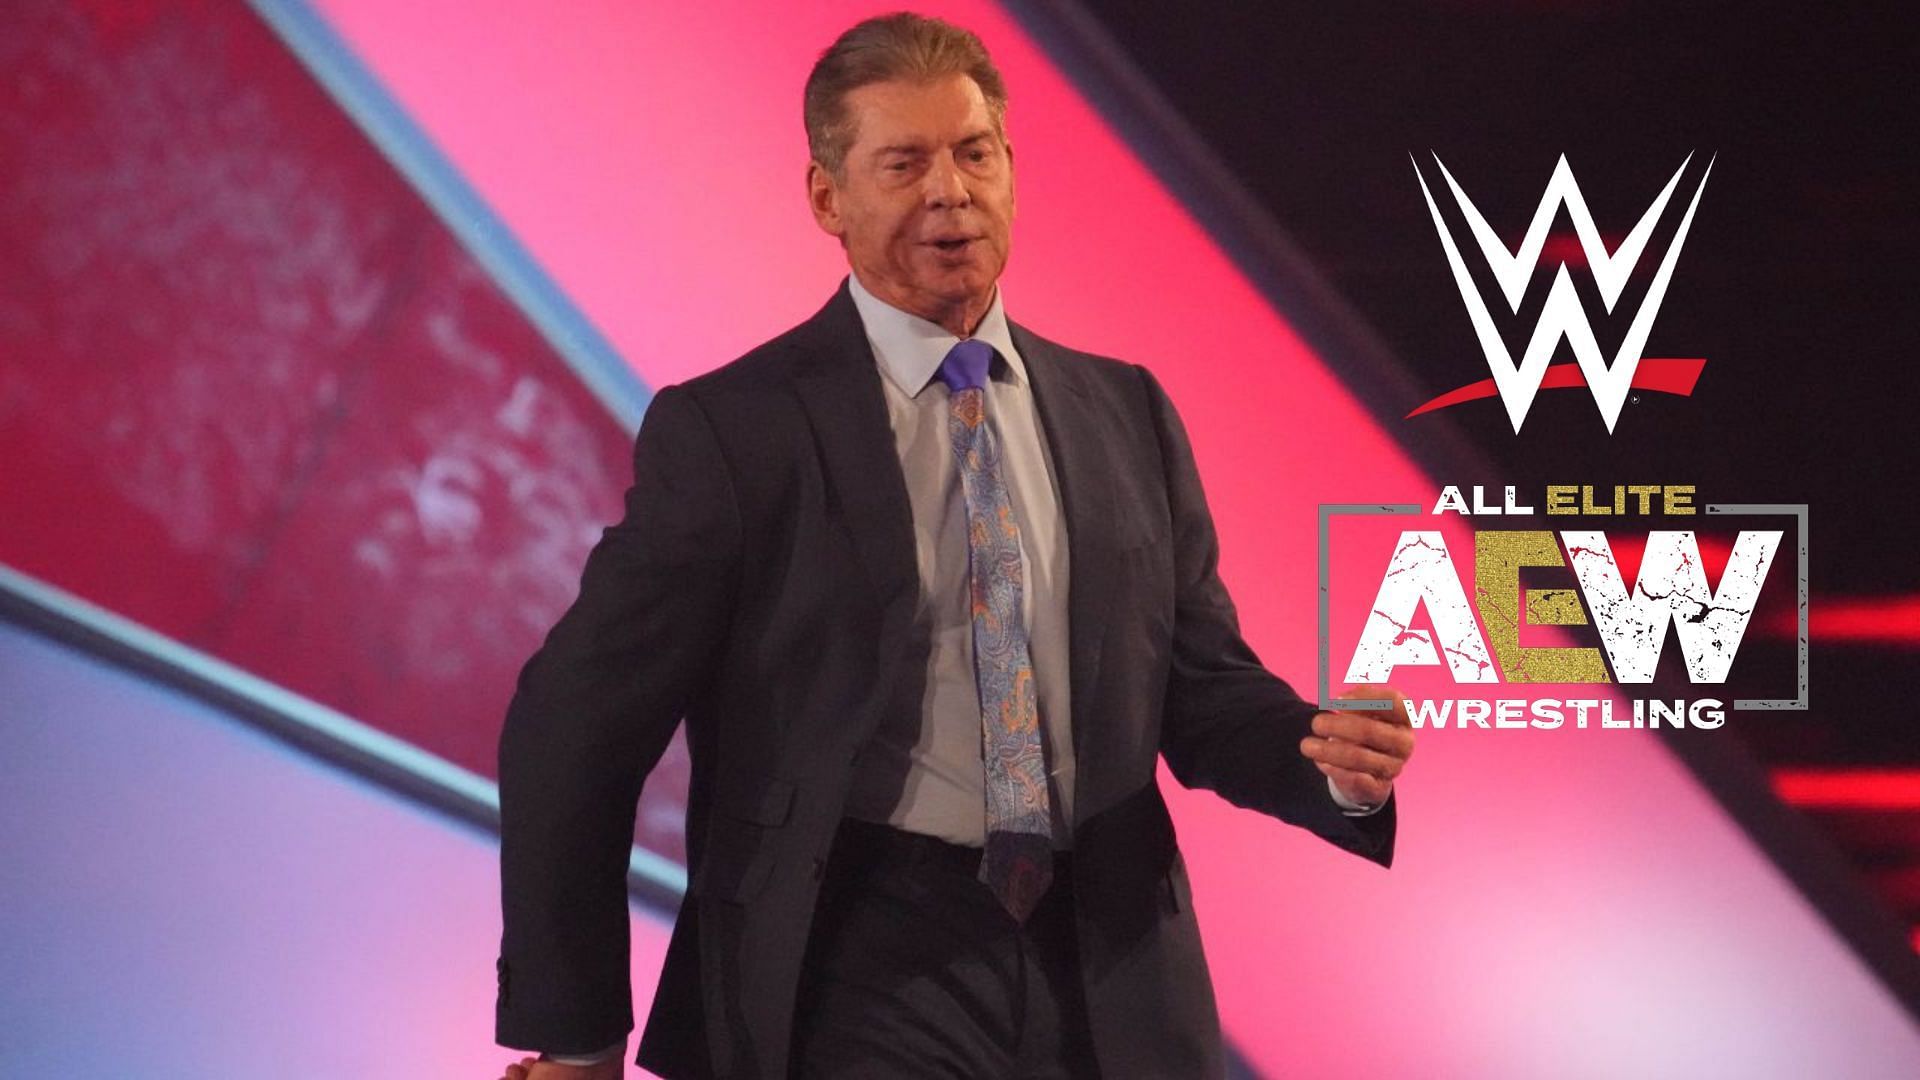 Vince McMahon is the majority owner of WWE.